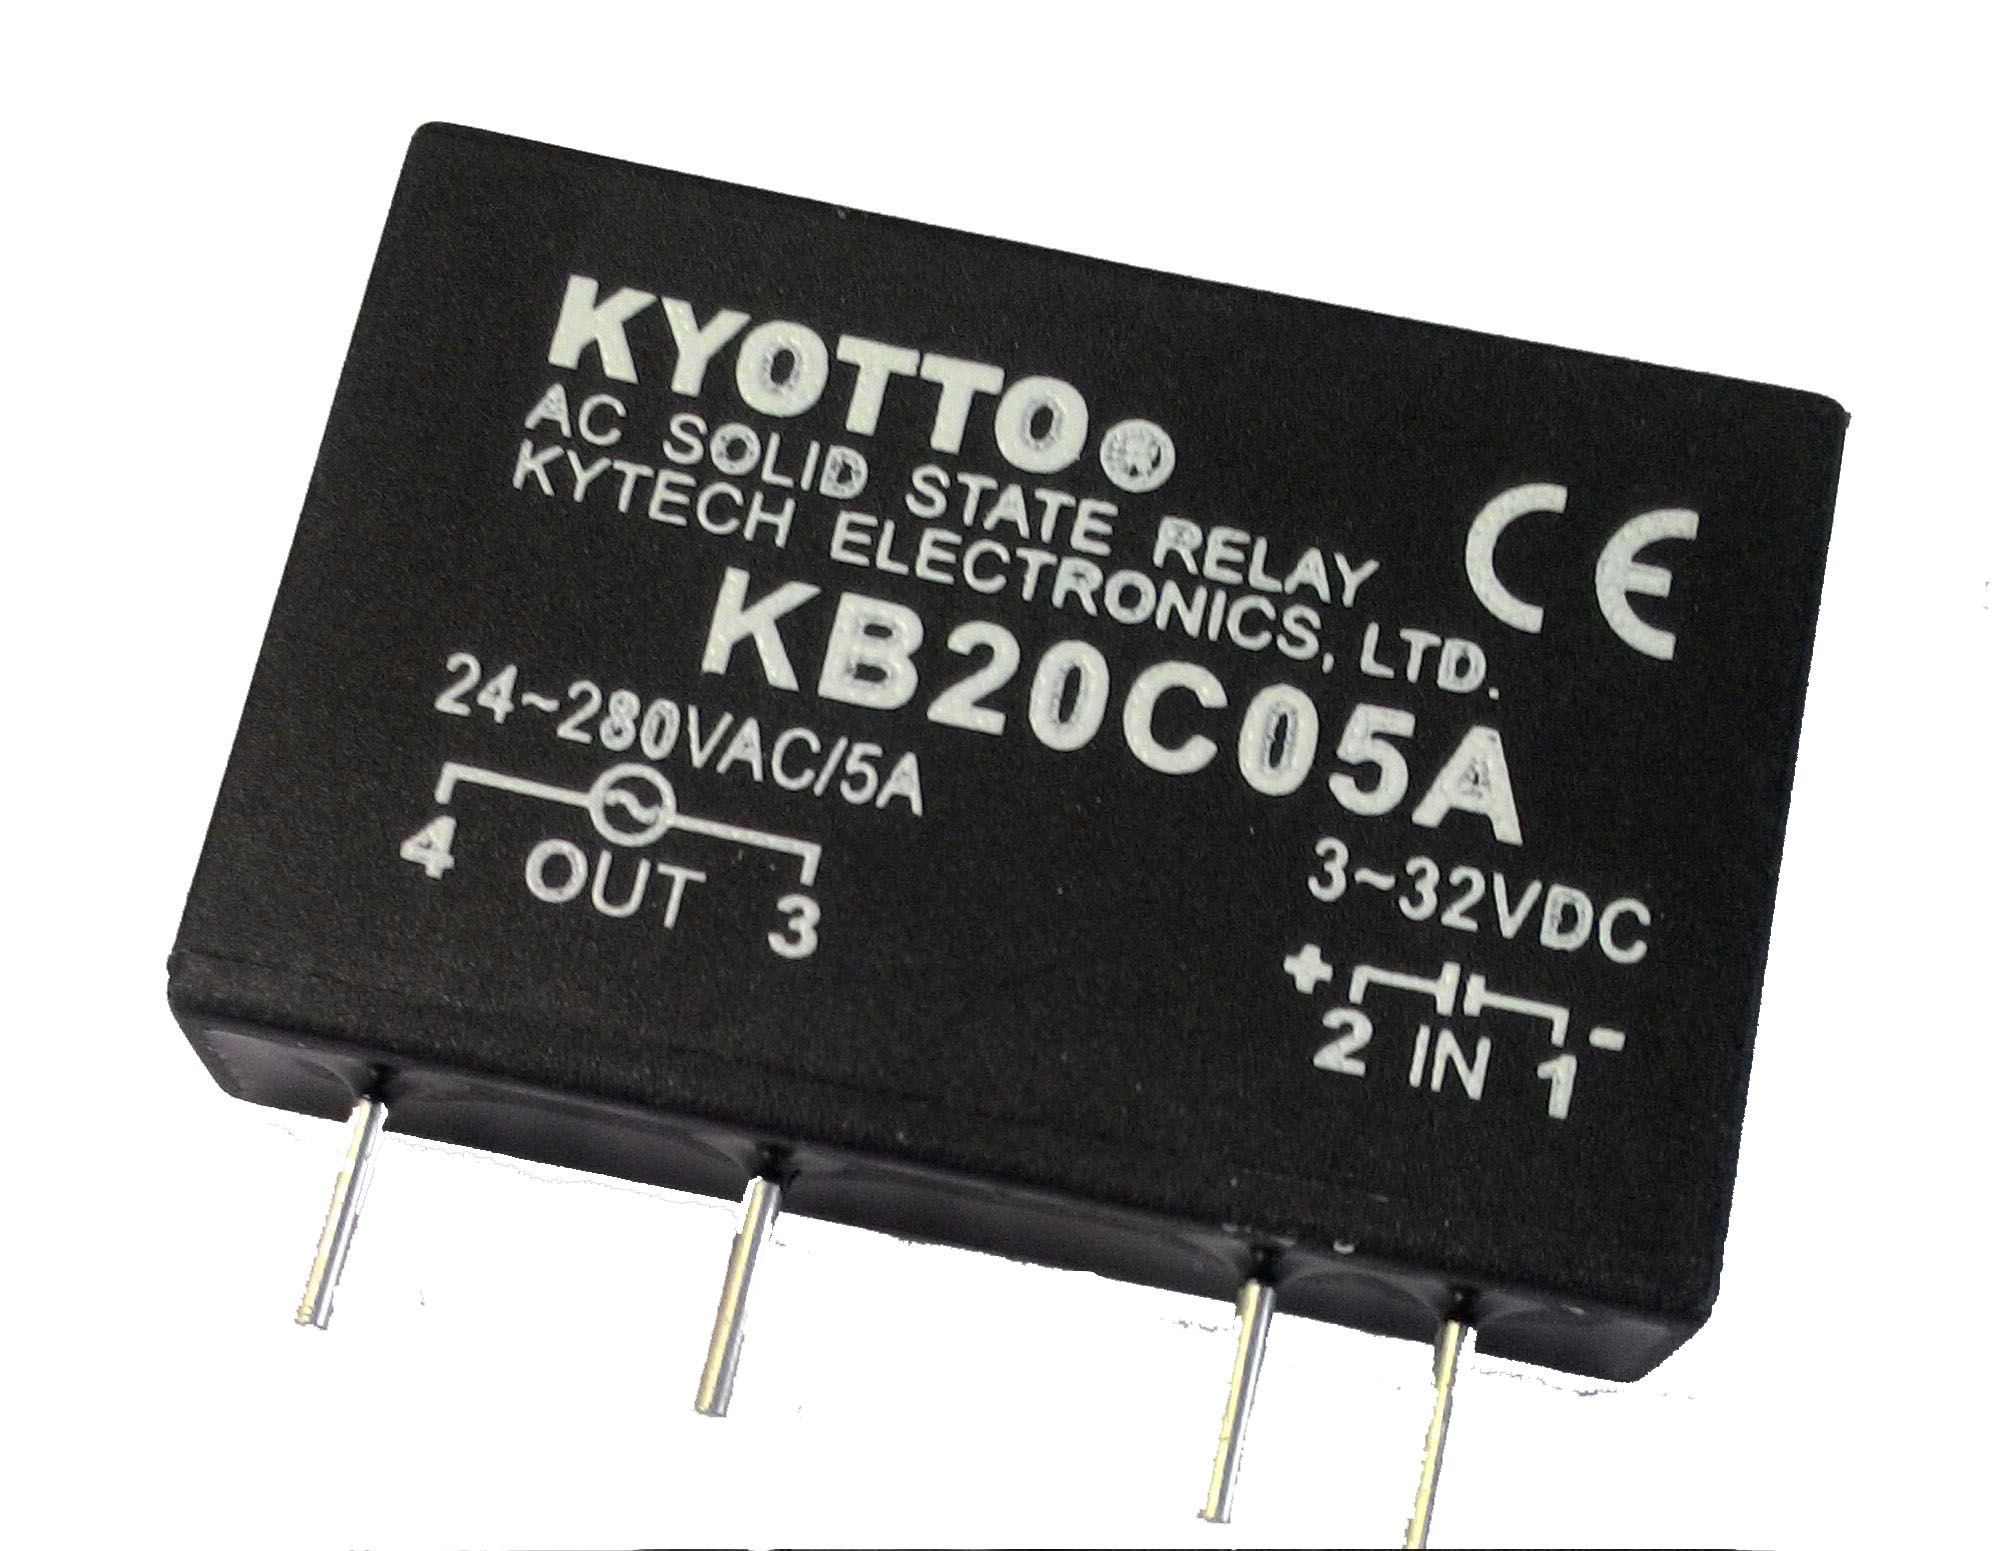 1pc KYOTTO AC Solid State Relay SSR KD20C125AX 280VAC 125A Taiwan DC to AC 